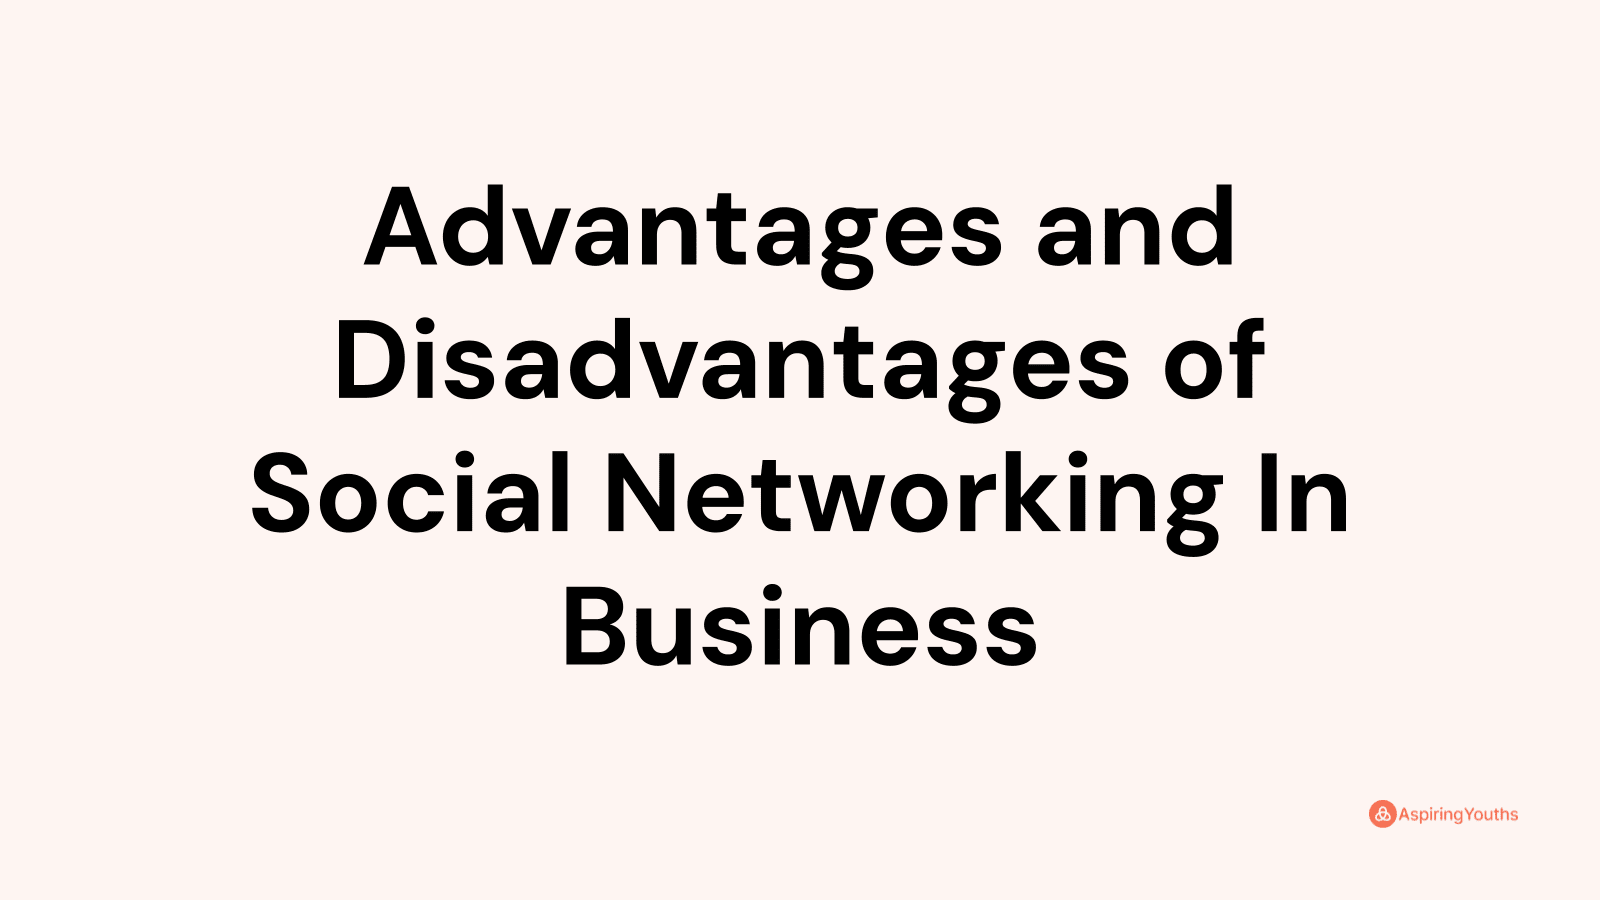 Advantages and disadvantages of Social Networking In Business